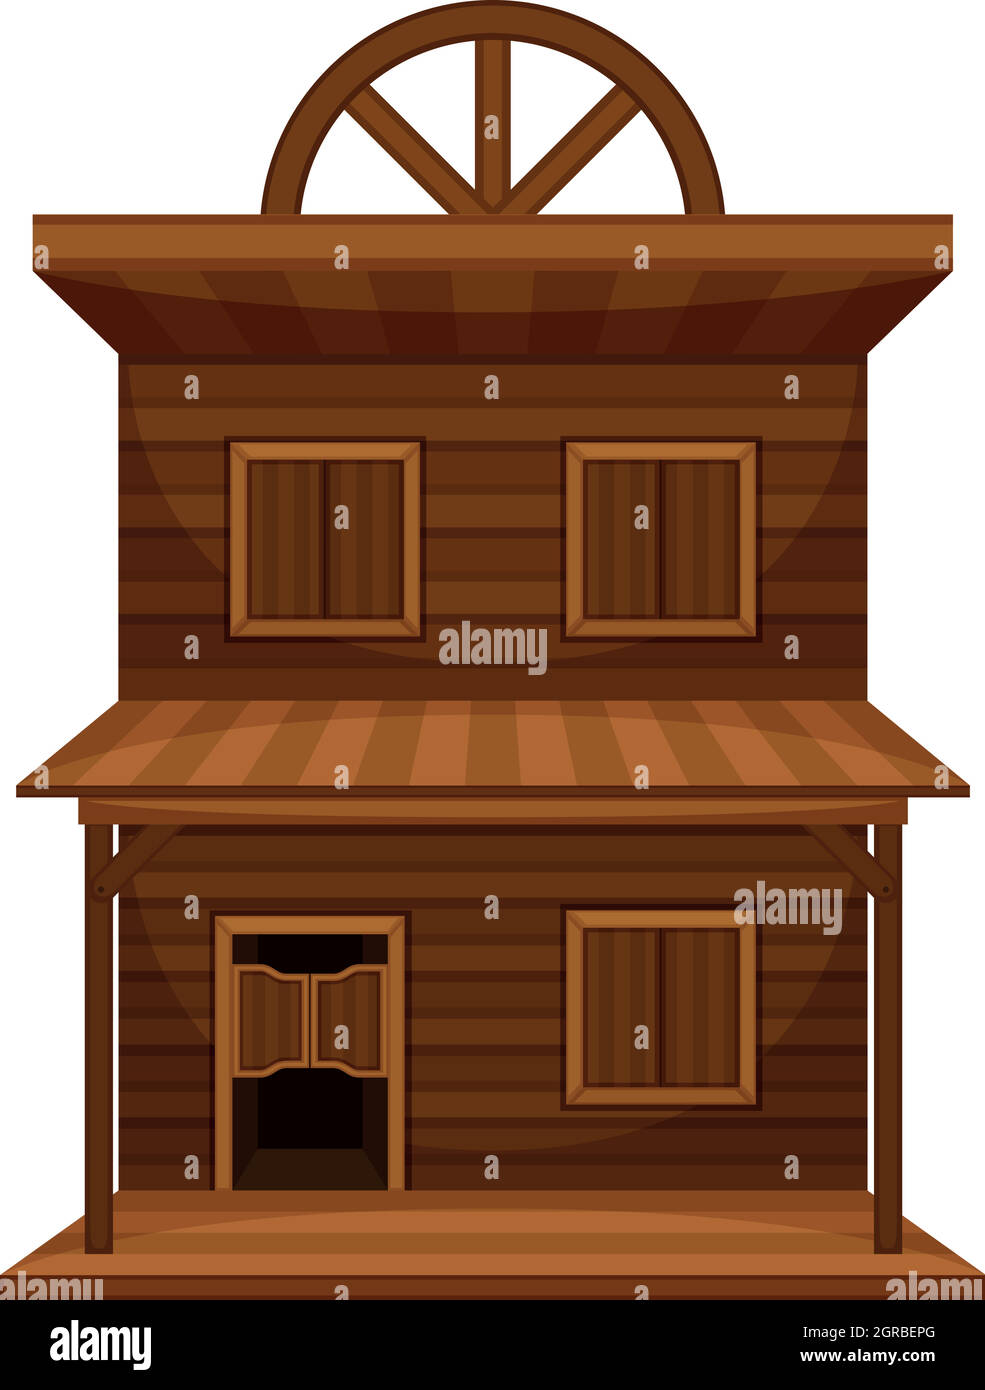 Wild west building made of wood Stock Vector